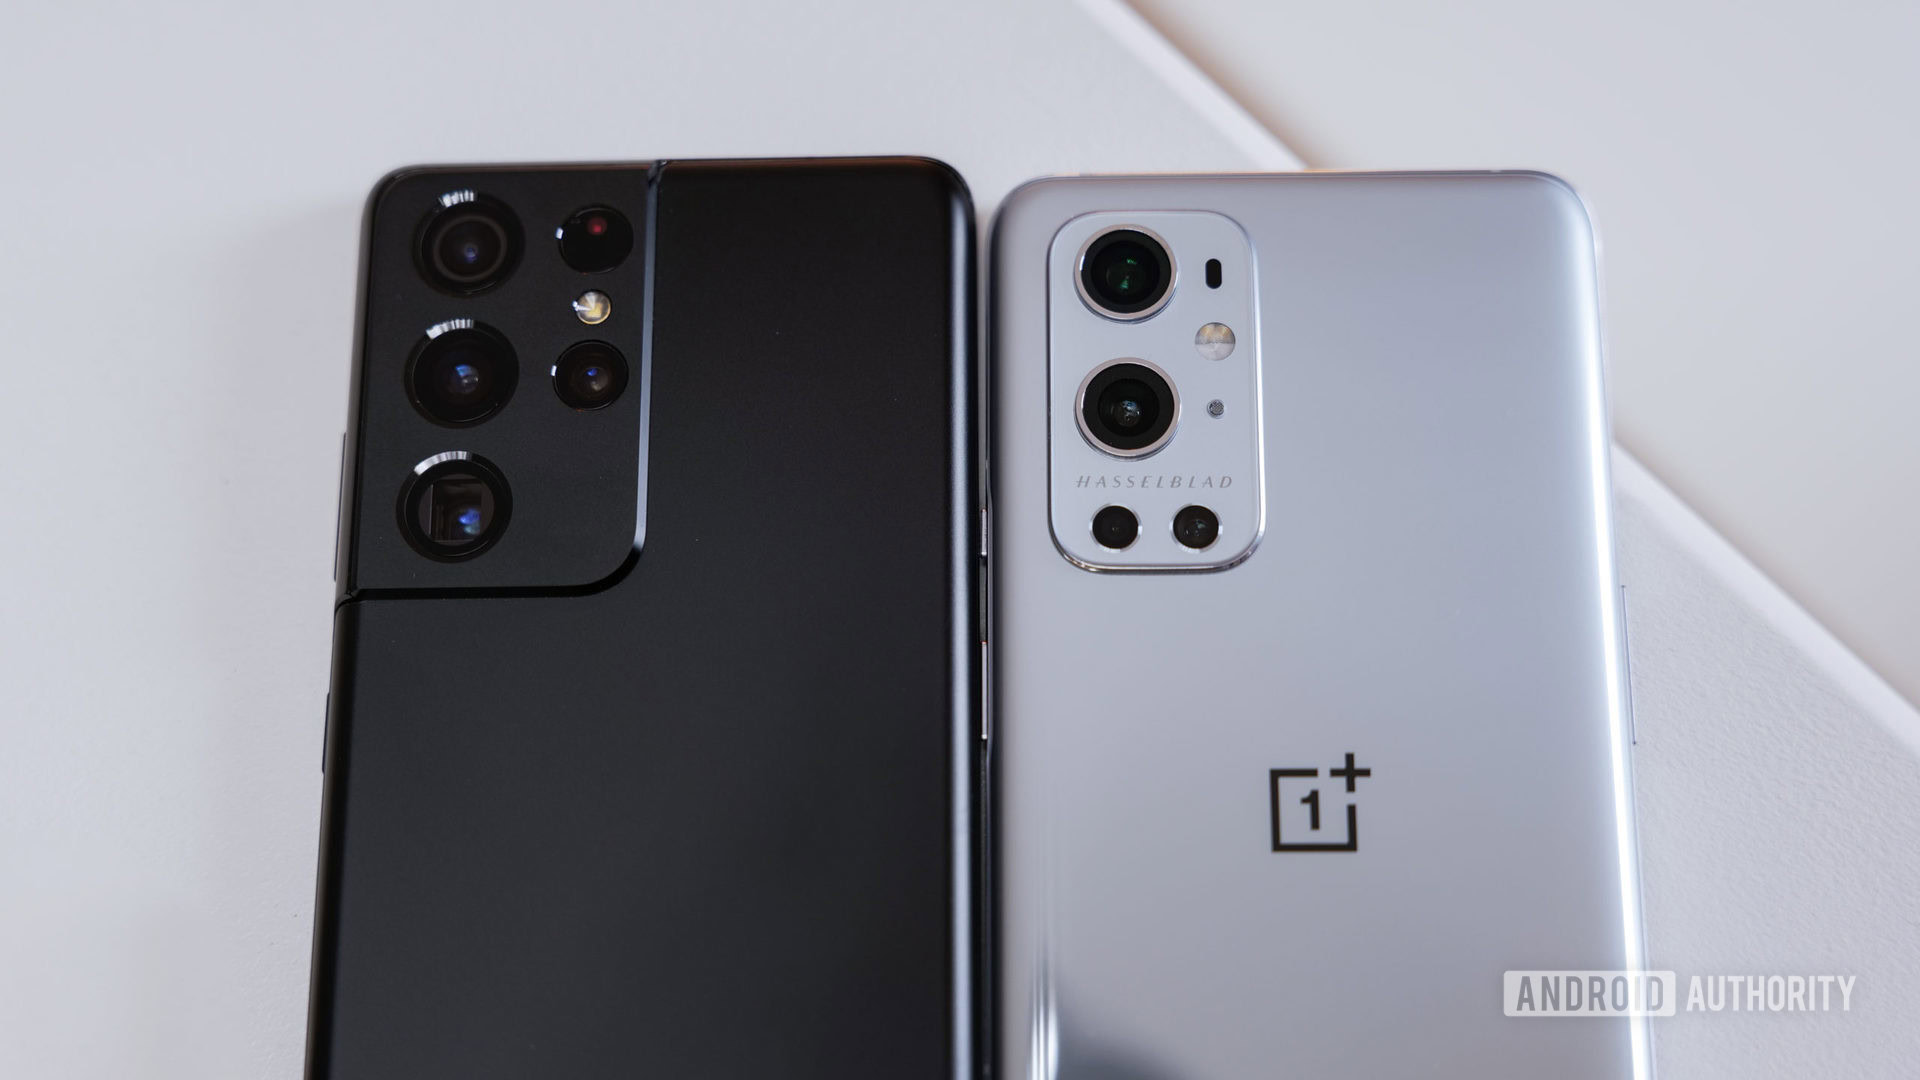 OnePlus 9 Pro vs Samsung Galaxy S21 Ultra on white table